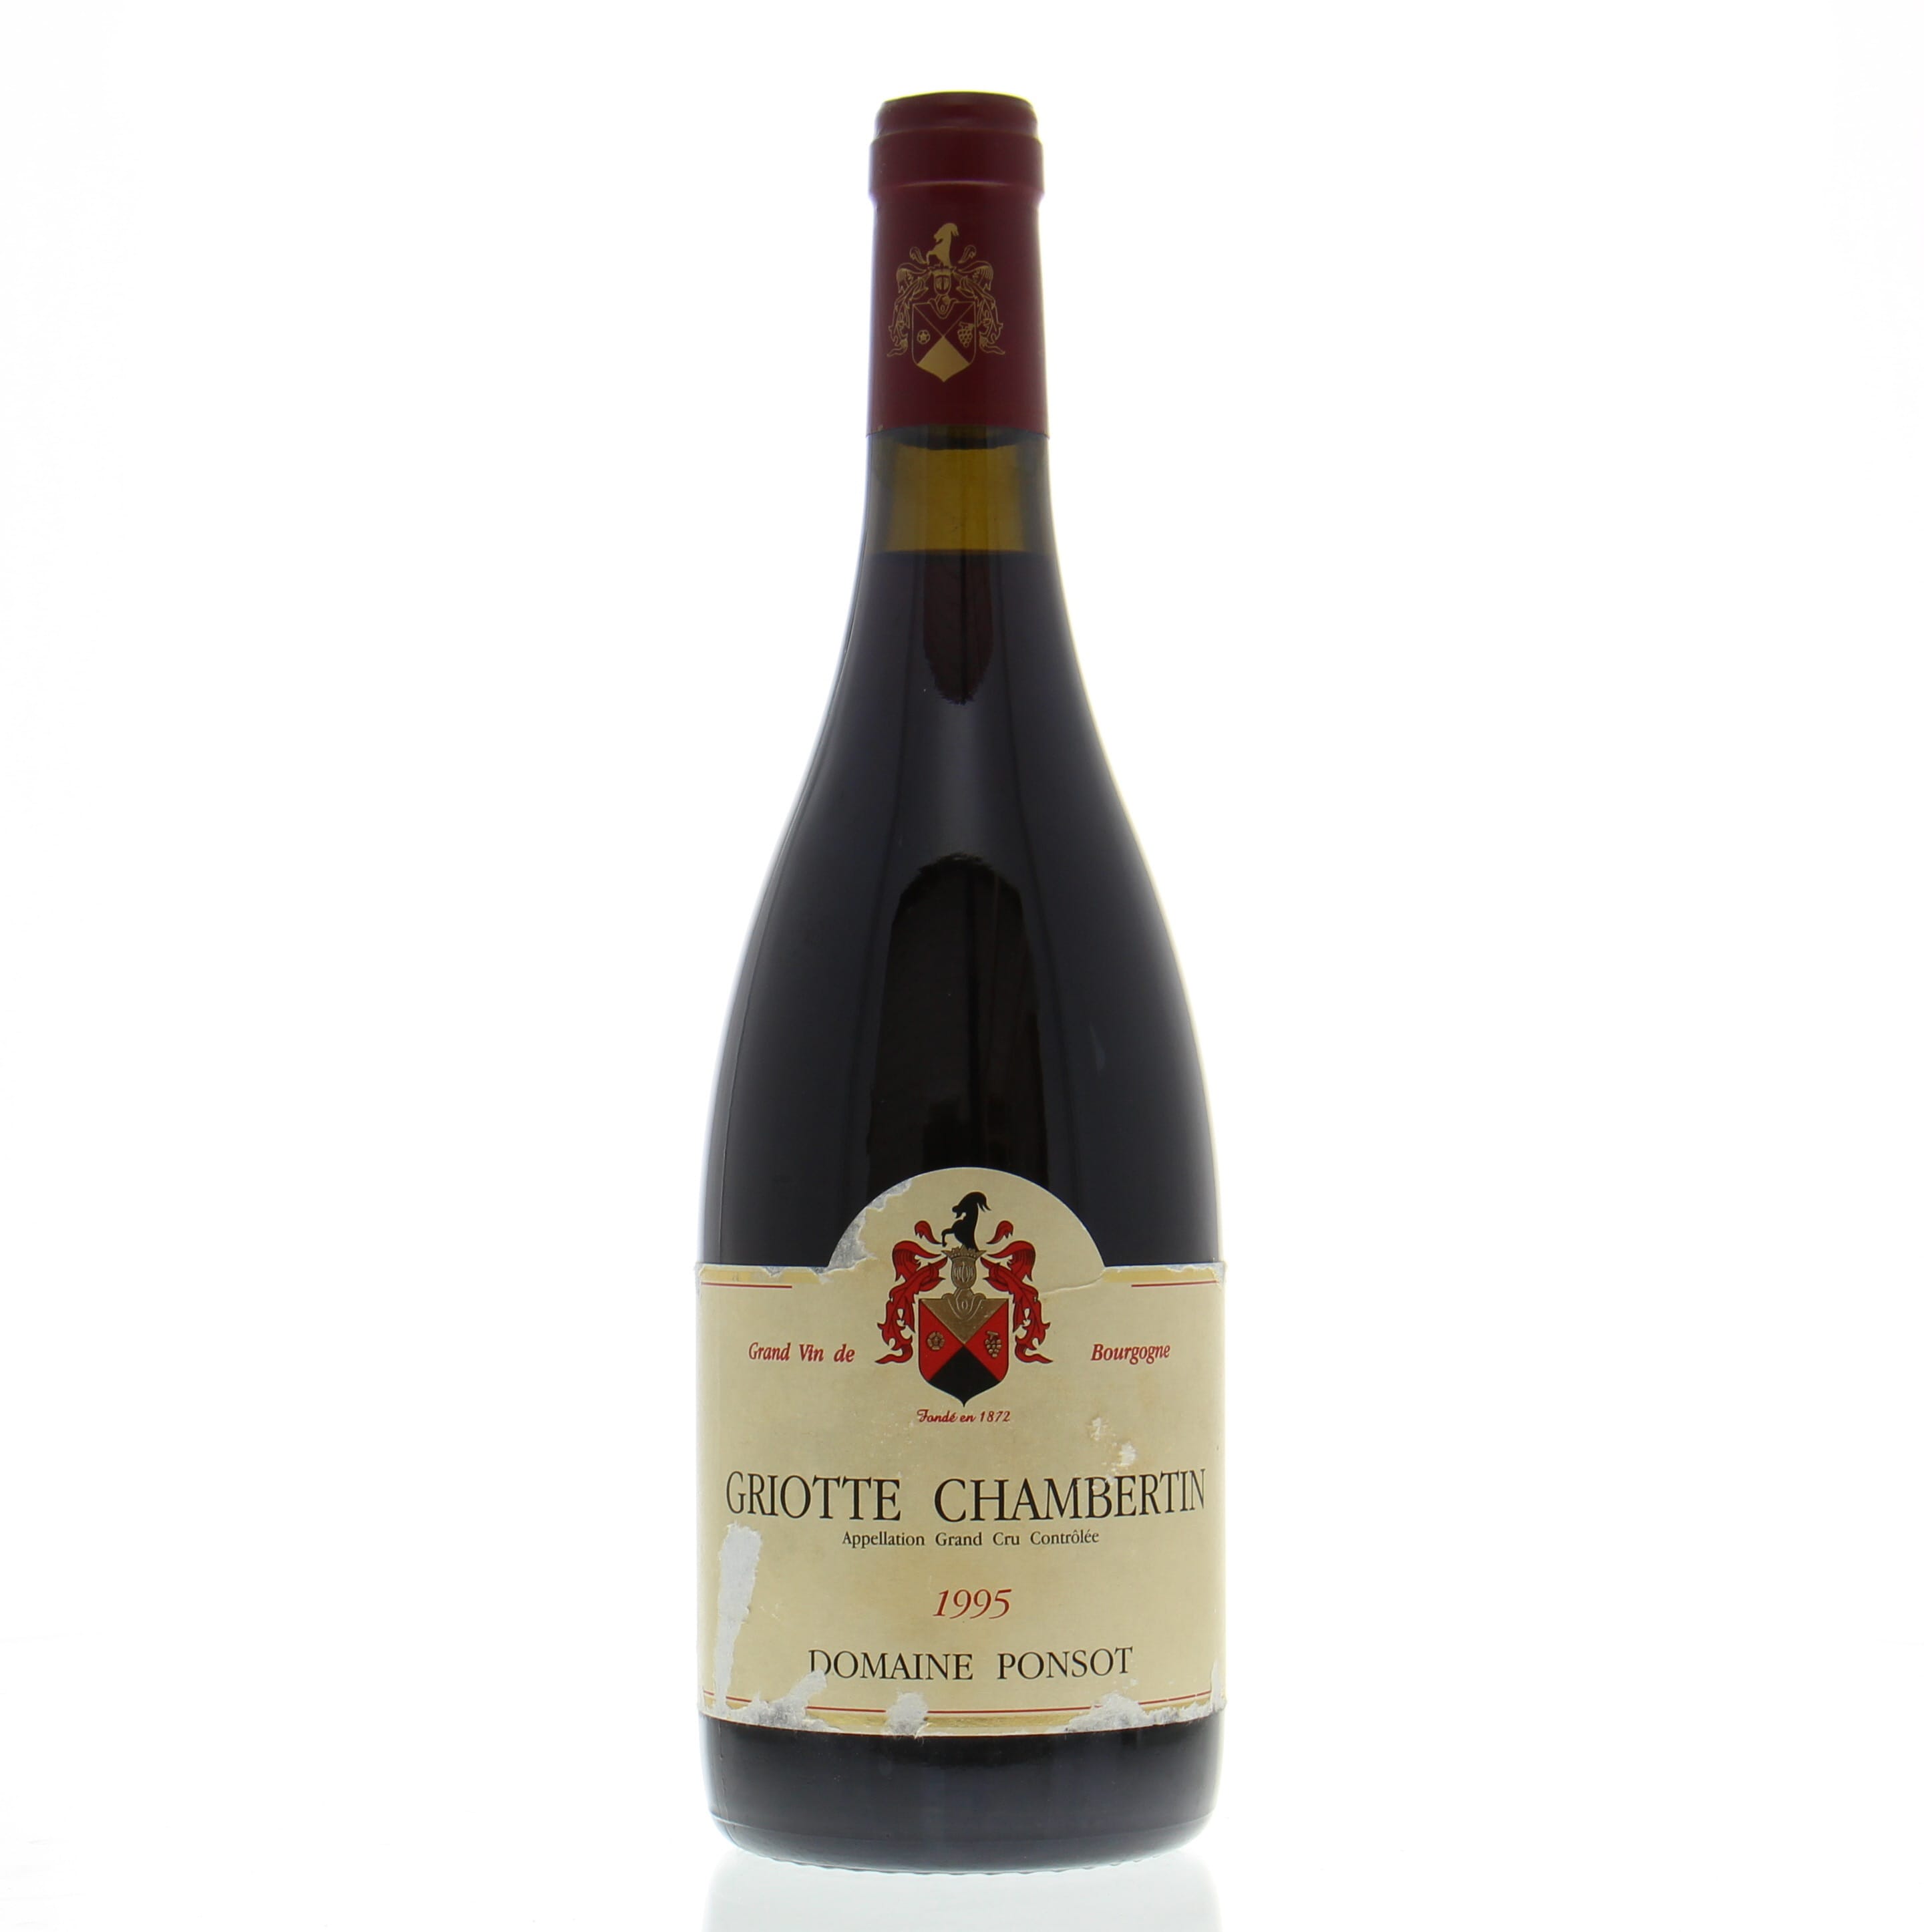 Domaine Ponsot - Griotte Chambertin 1995